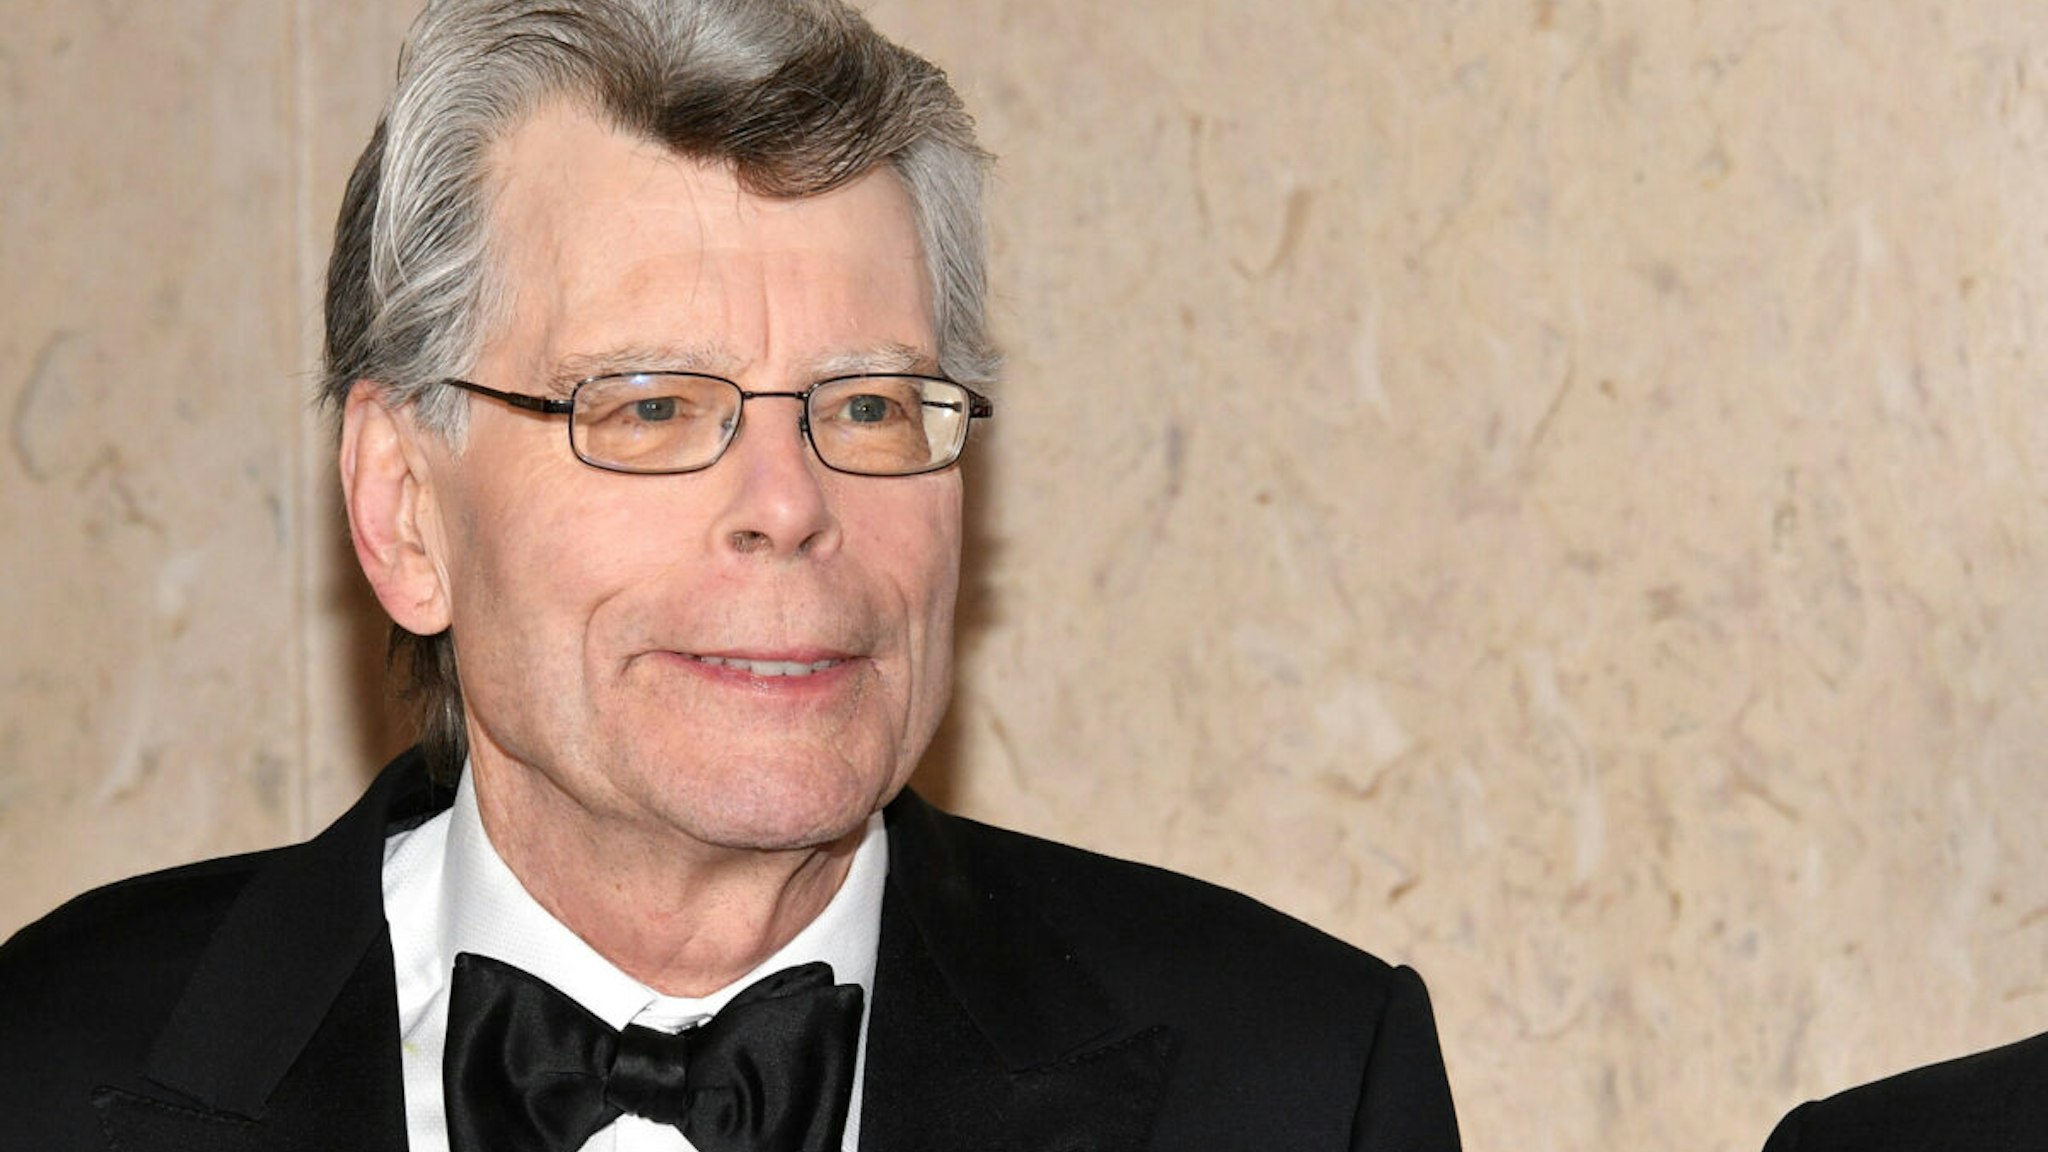 Stephen King attends the 2018 PEN Literary Gala at the American Museum of Natural History on May 22, 2018 in New York City.